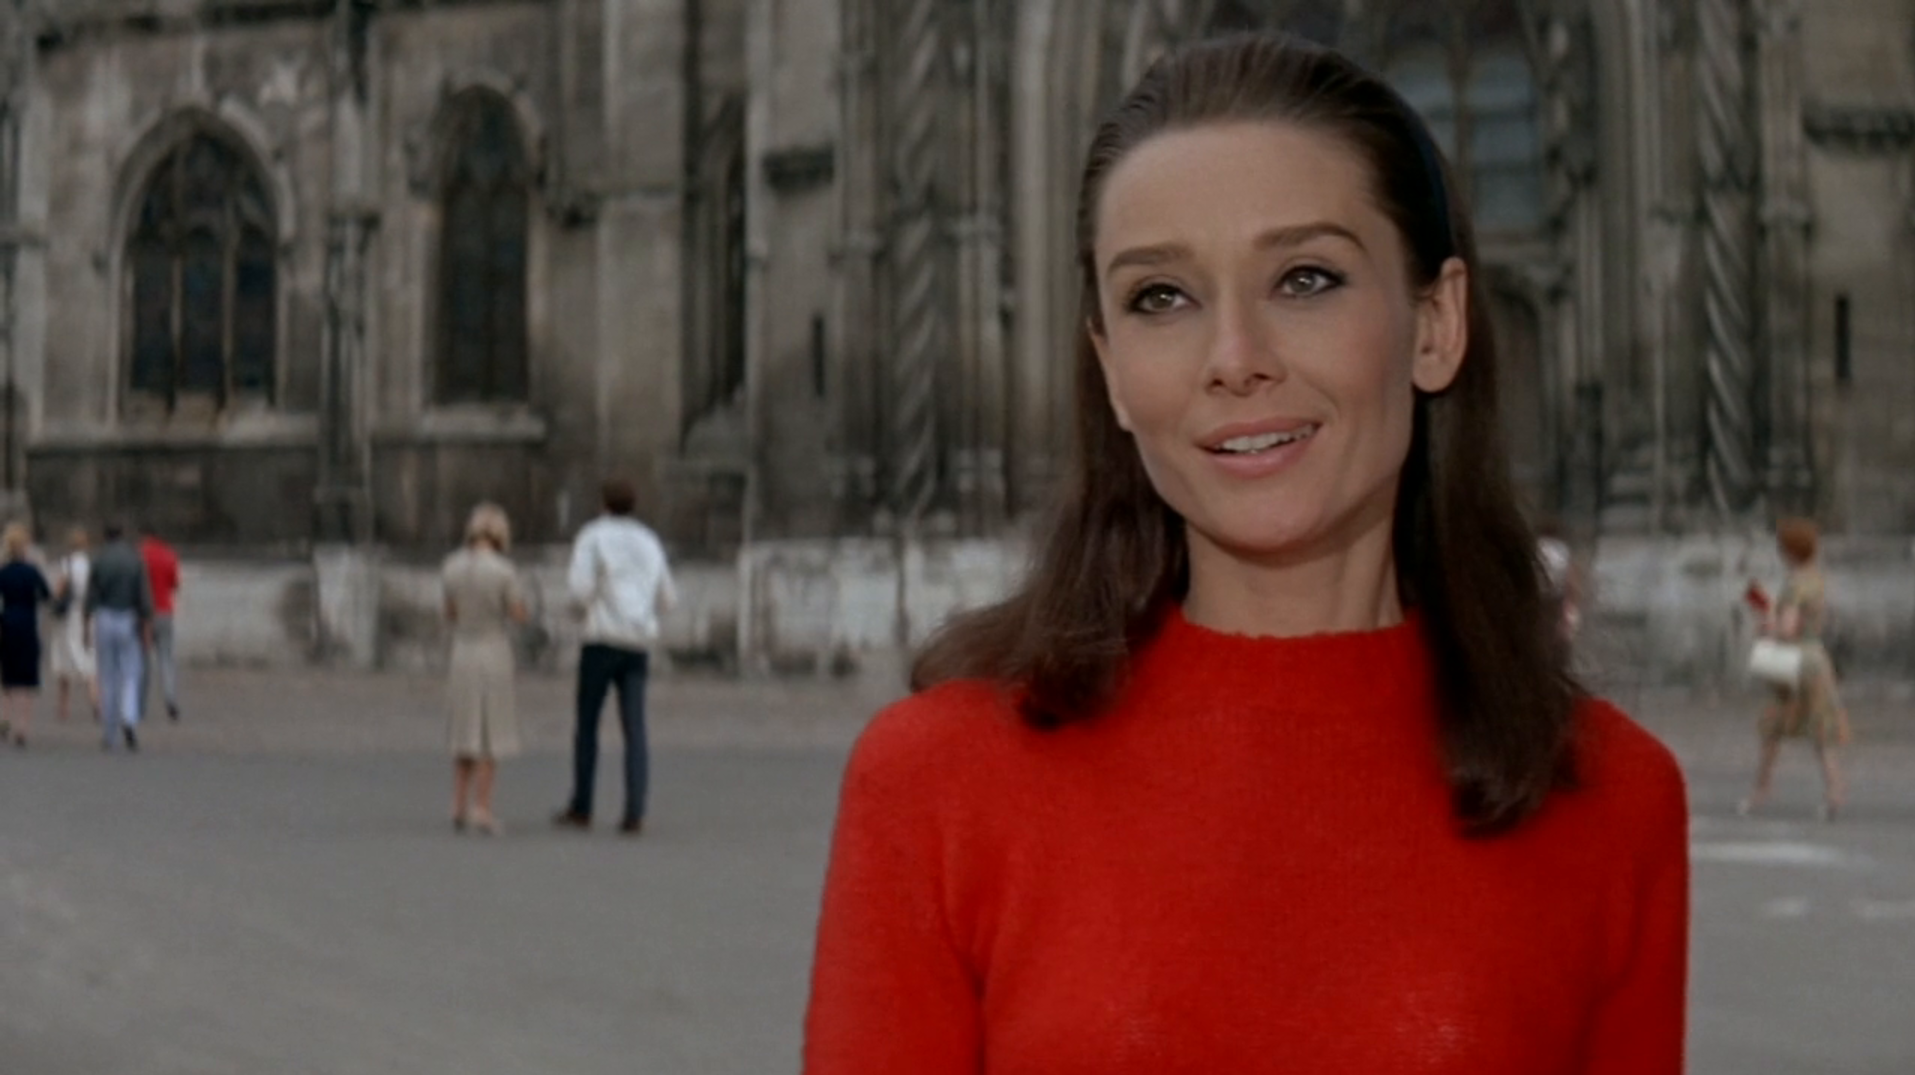 Audrey Hepburn and Stanley Donen pushed Classic Hollywood towards modernity